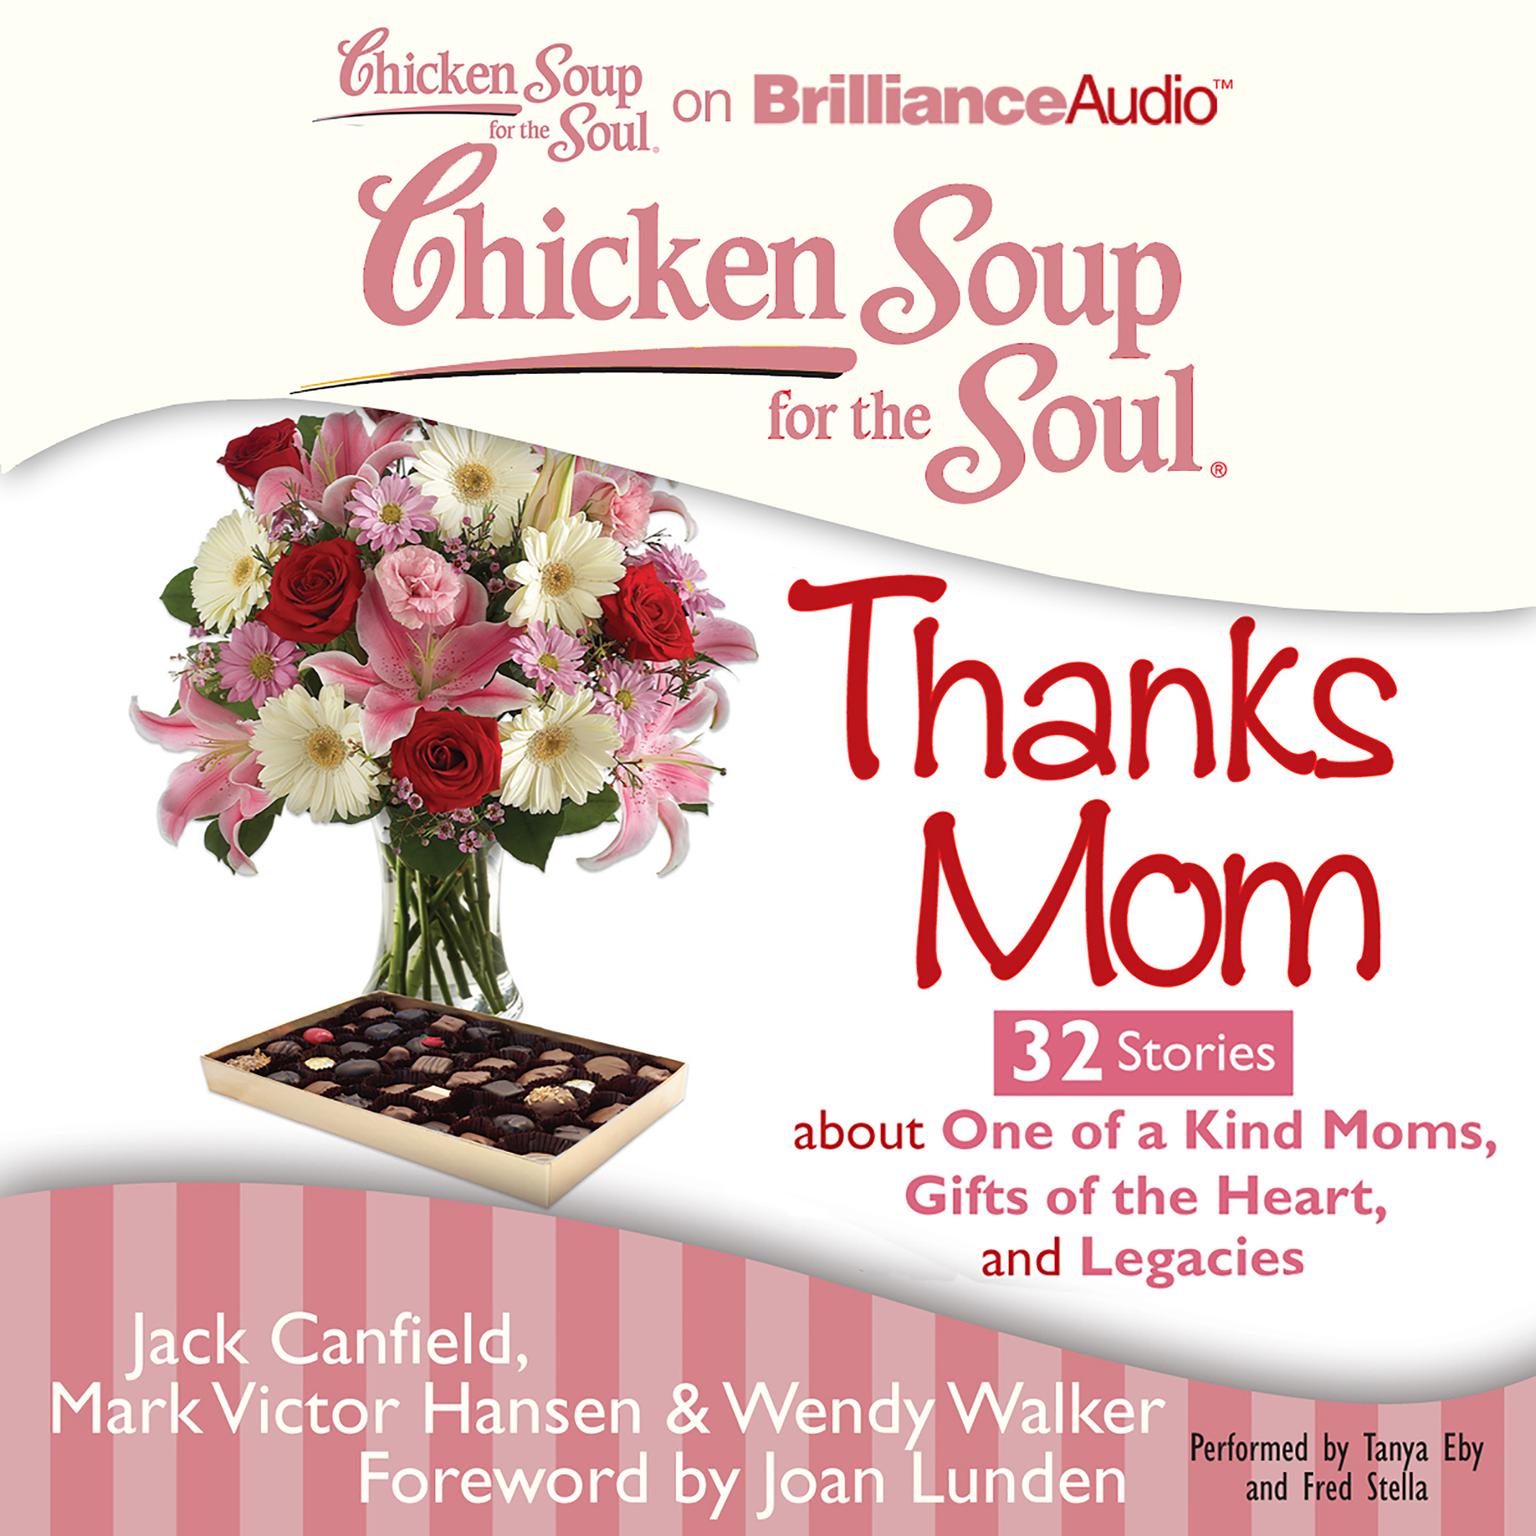 Chicken Soup for the Soul: Thanks Mom - 32 Stories about One of a Kind Moms, Gifts of the Heart, and Legacies Audiobook, by Jack Canfield